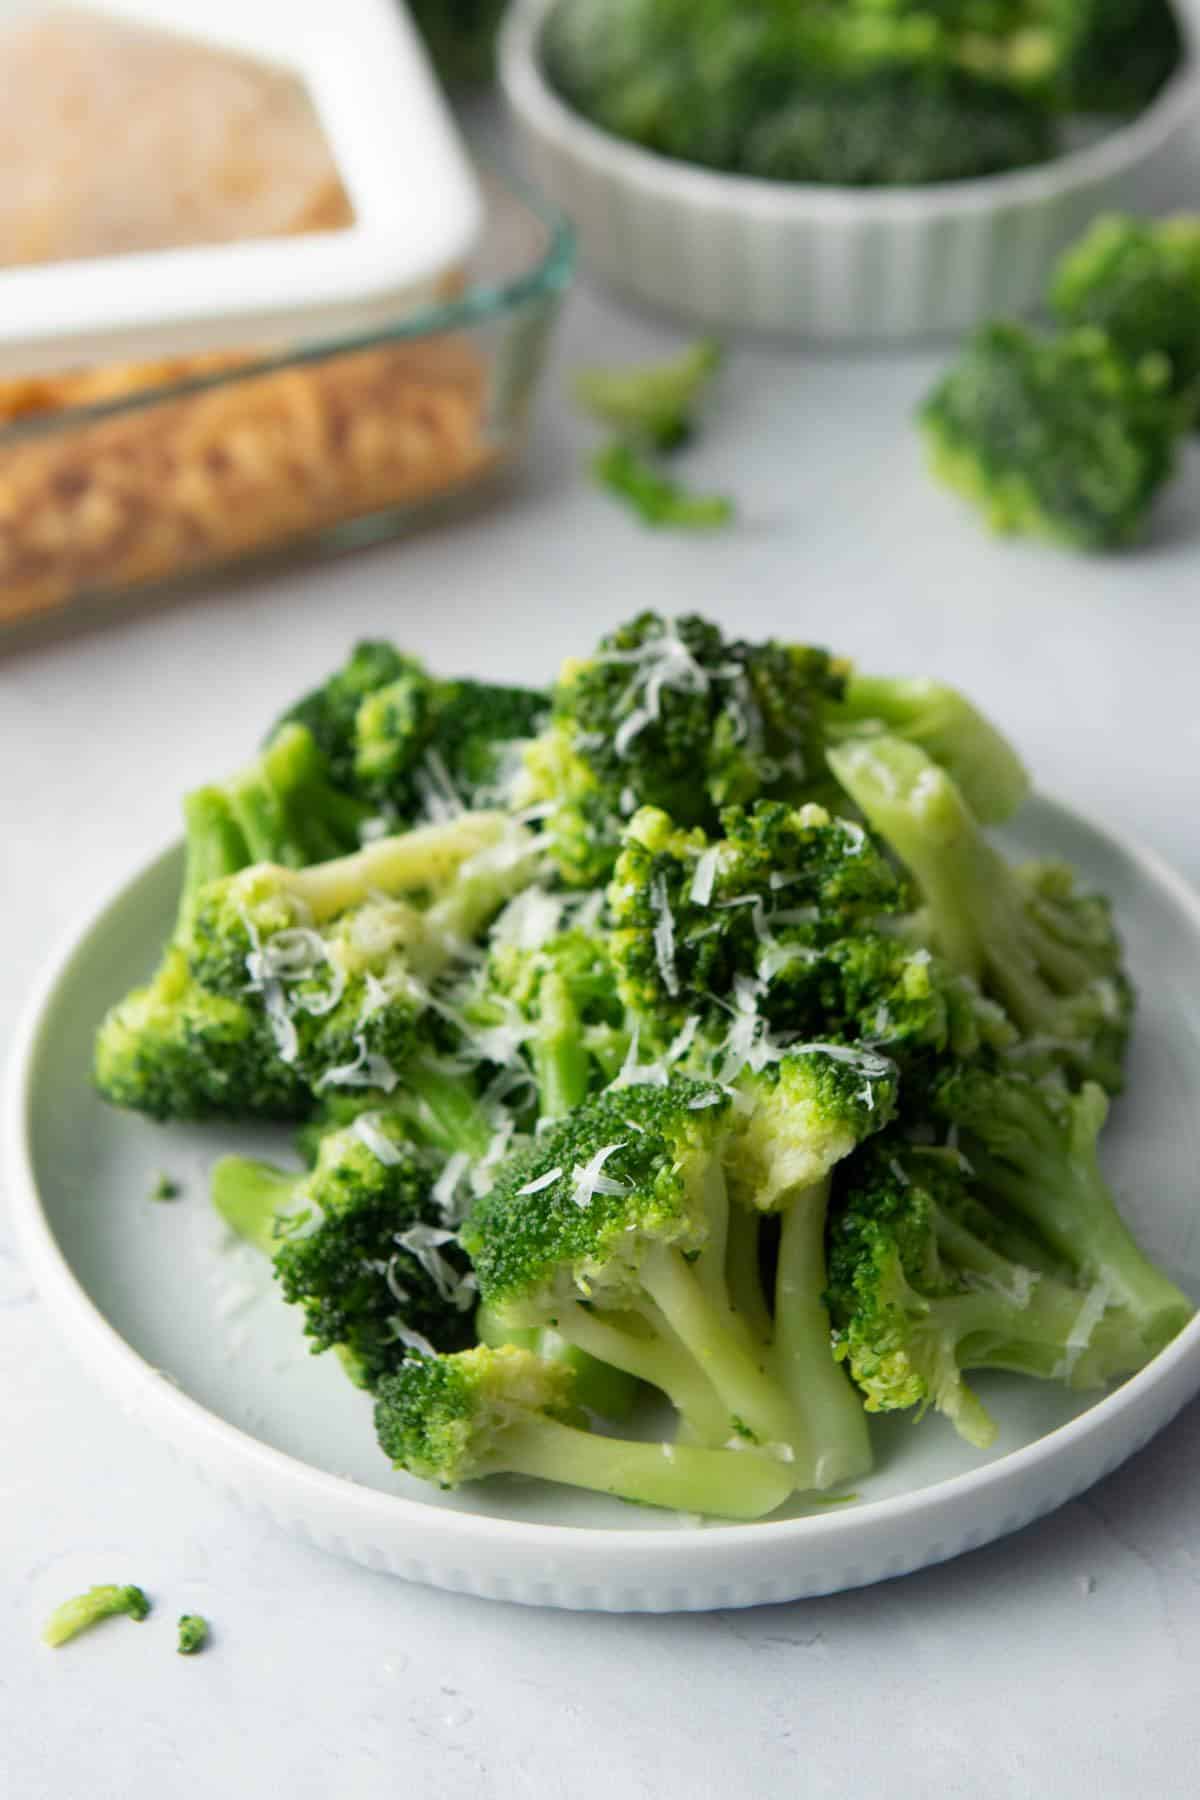 pile of broccoli with parmesan cheese on plate